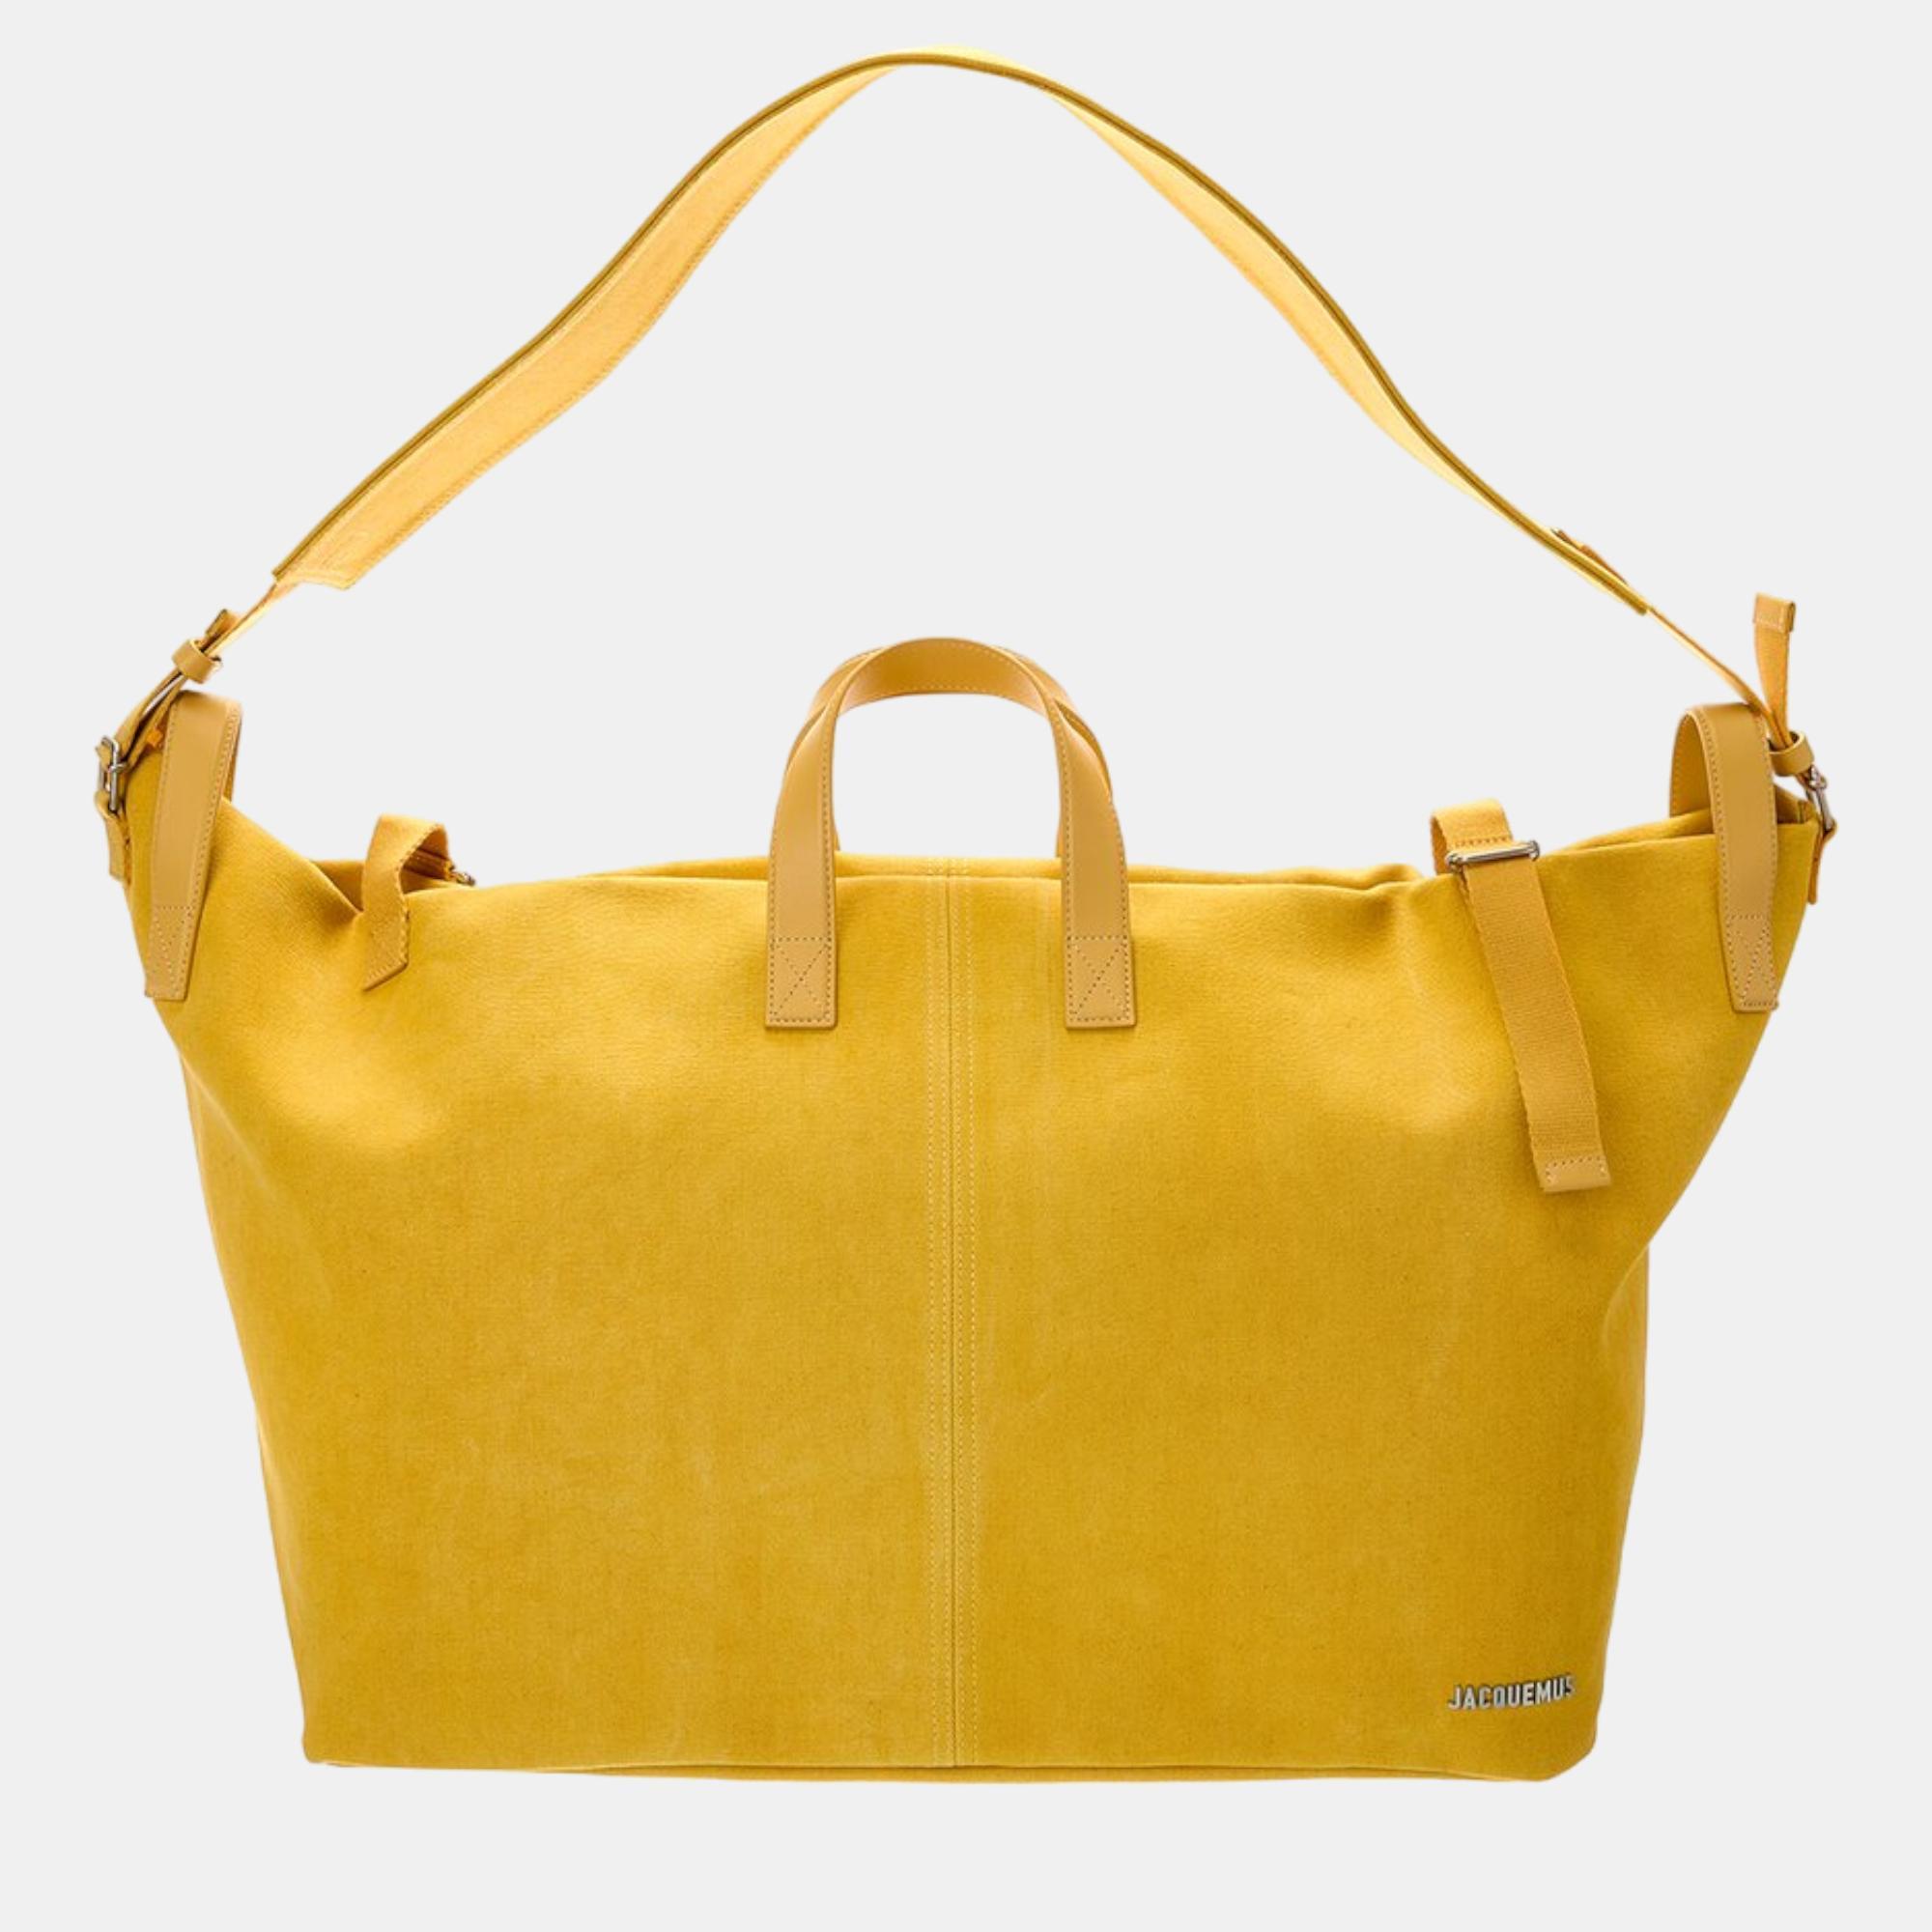 Elevate your every day with this Jacquemus tote. Meticulously designed it seamlessly blends functionality with luxury offering the perfect accessory to showcase your discerning style while effortlessly carrying your essentials.